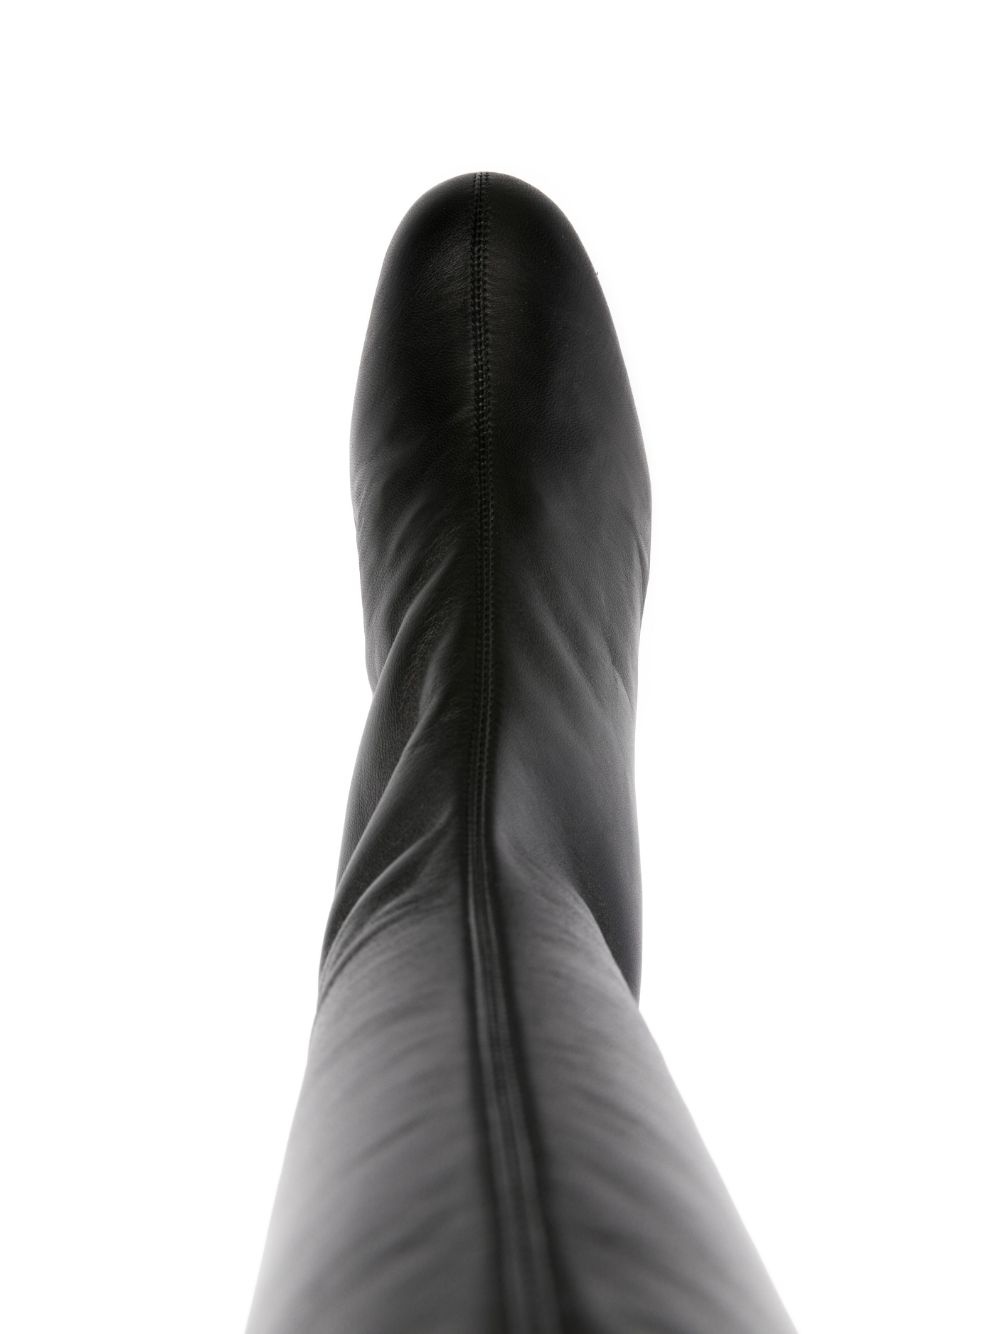 Saint Honore 50 leather knee-high boots - 4